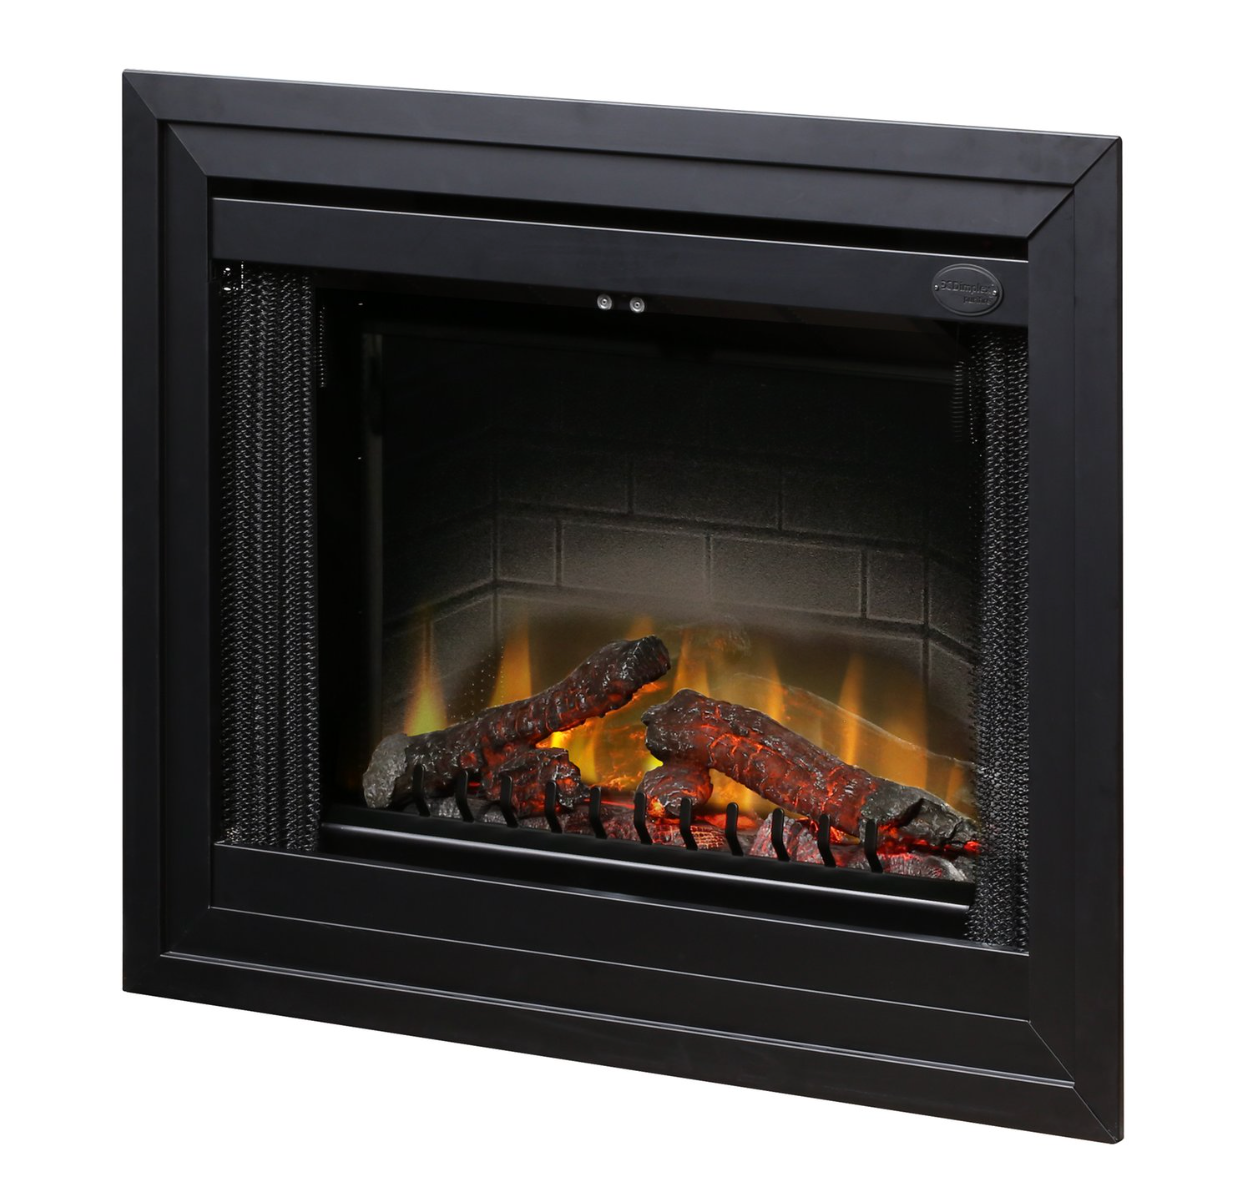 Dimplex 33" Deluxe Built-In Electric Firebox